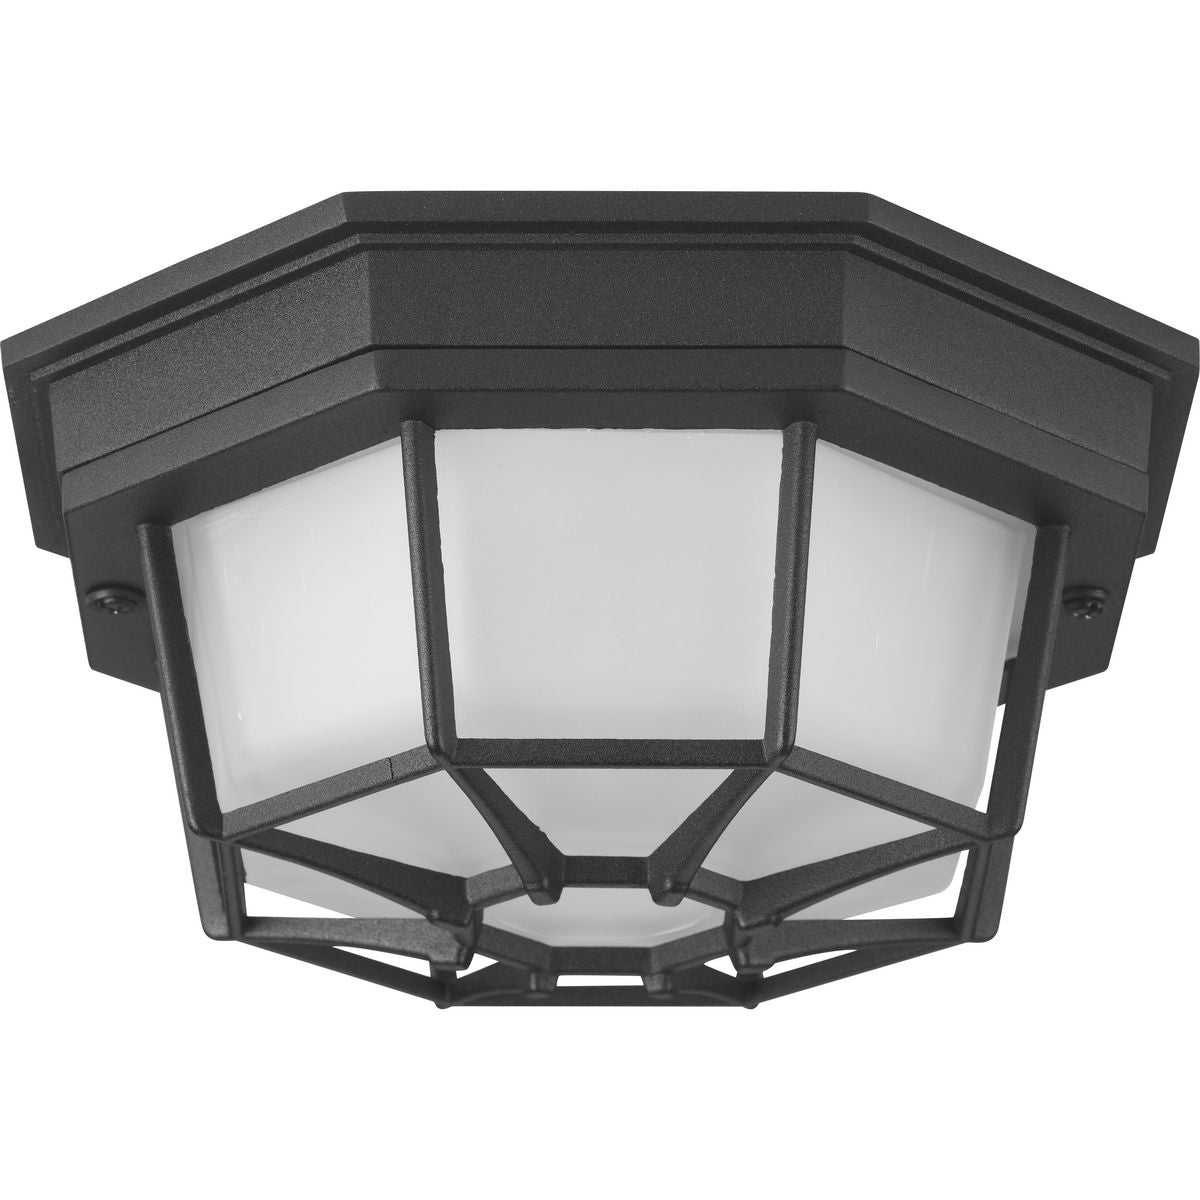 Milford LED Outdoor Ceiling Light